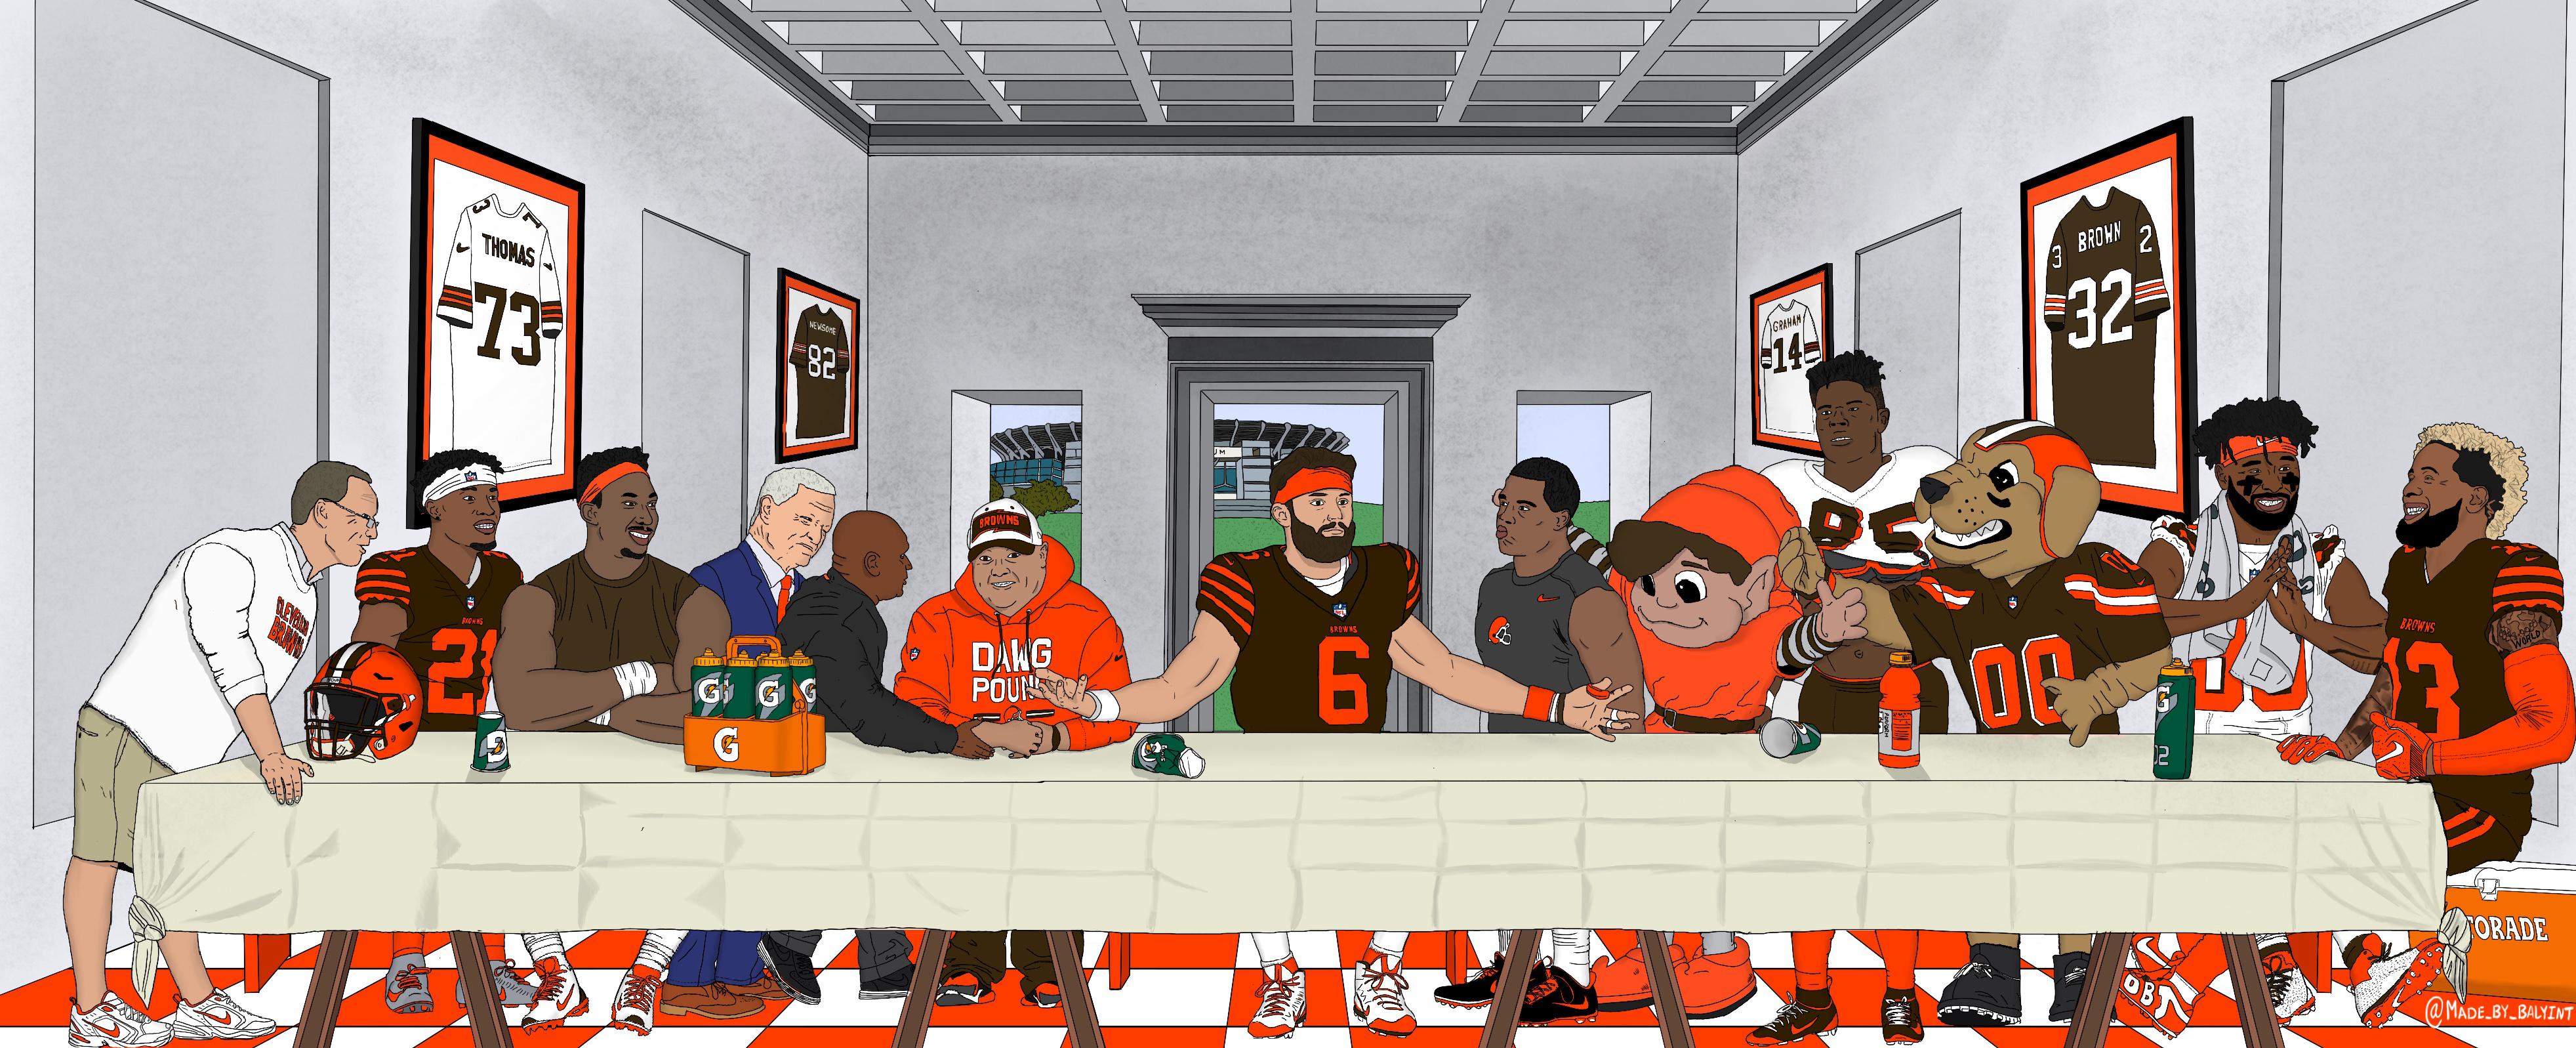 COMPLETED. Cleveland Browns Last Supper Wallpaper